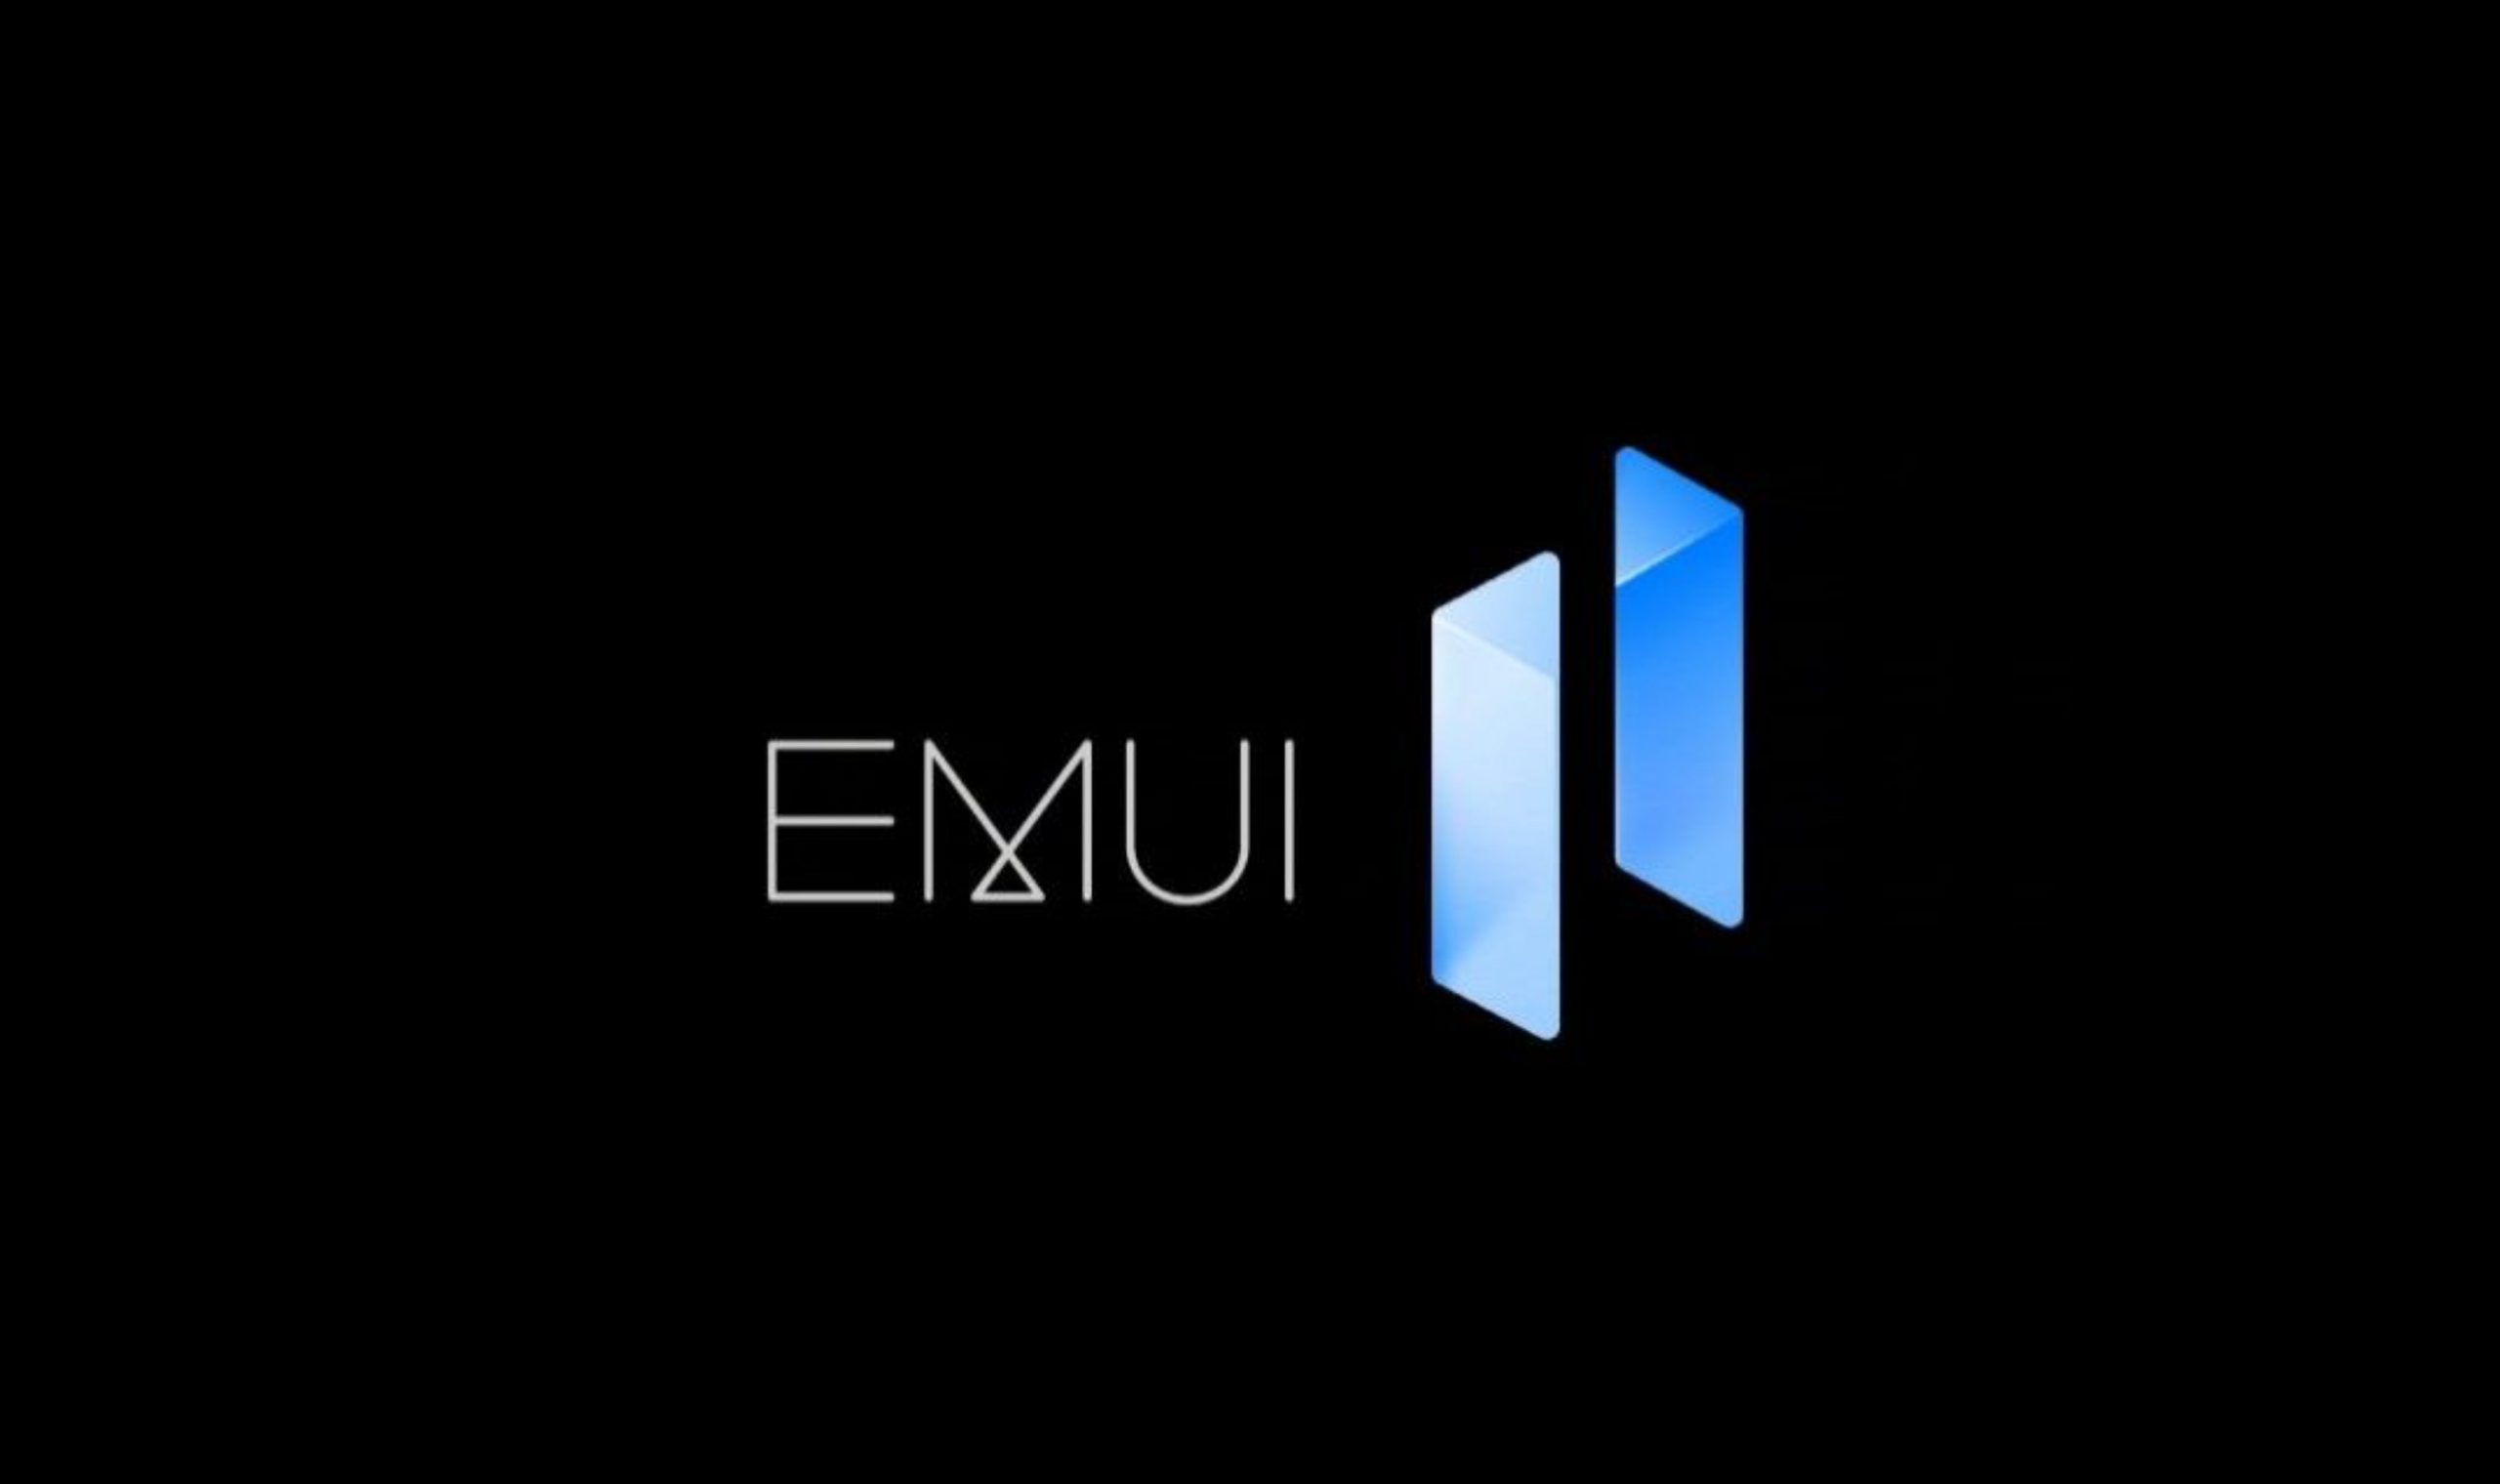 EMUI 11 may be the final version before the transition to HongMeng OS